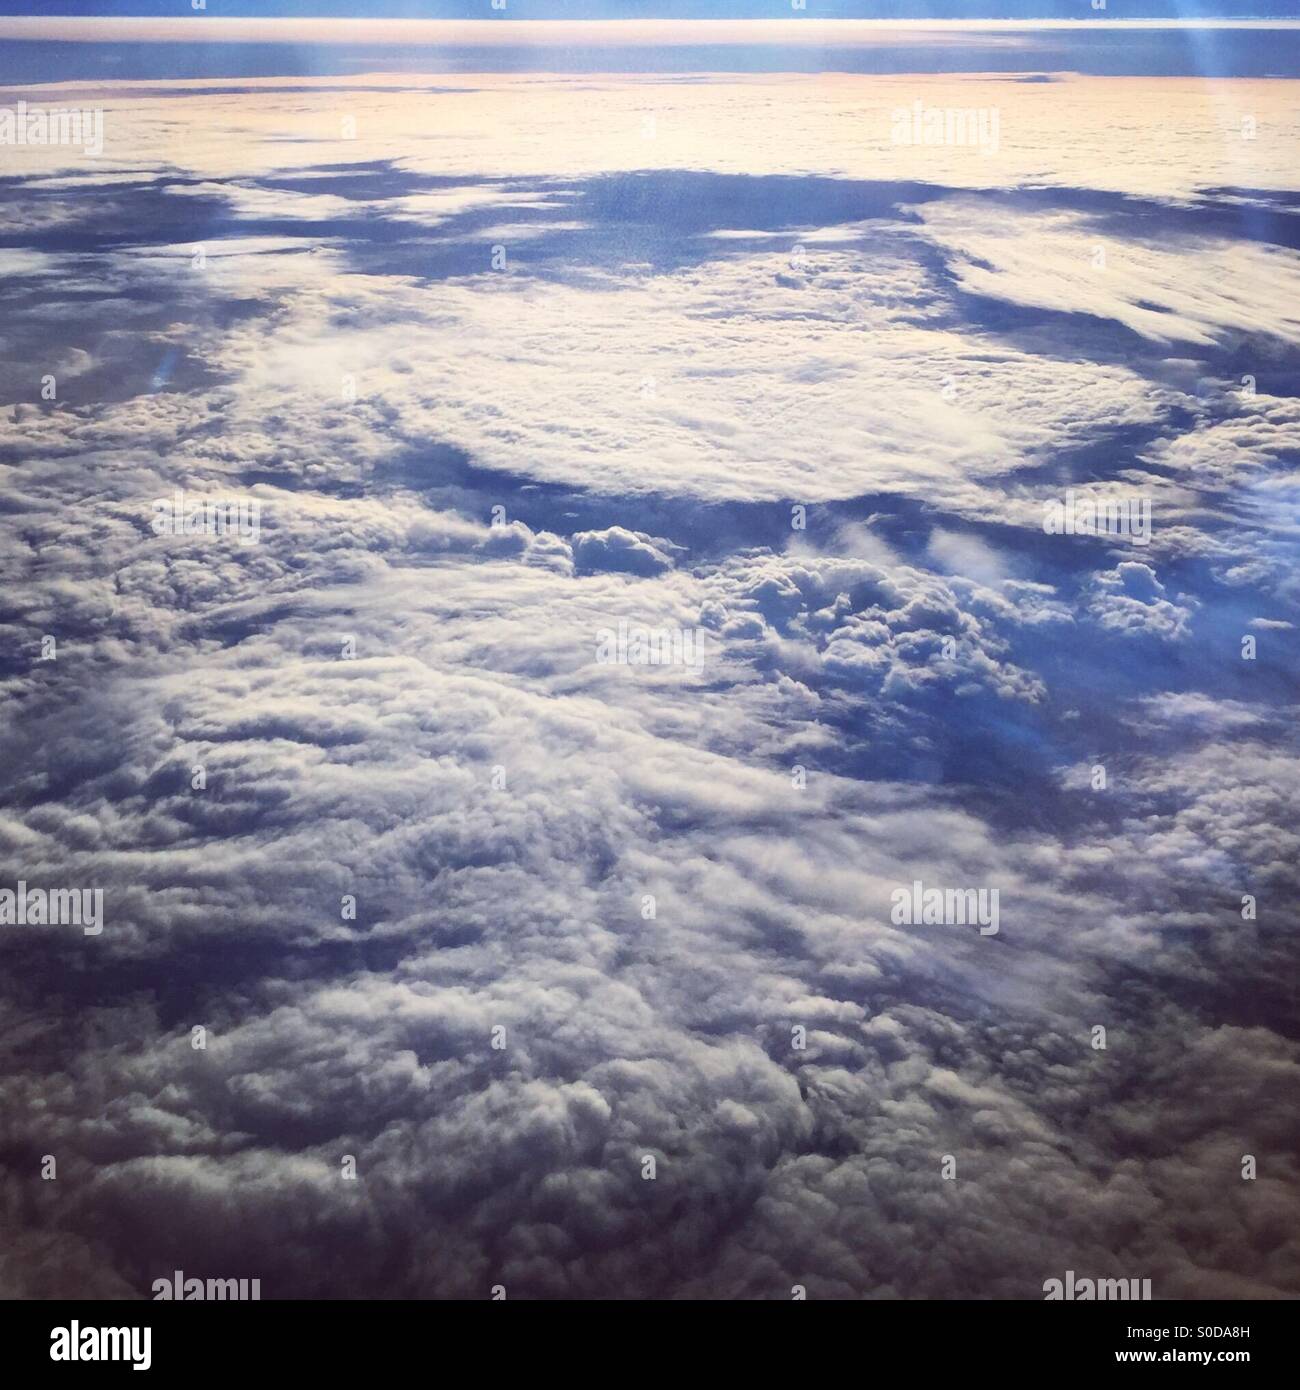 Amazing cloud formation from above Stock Photo